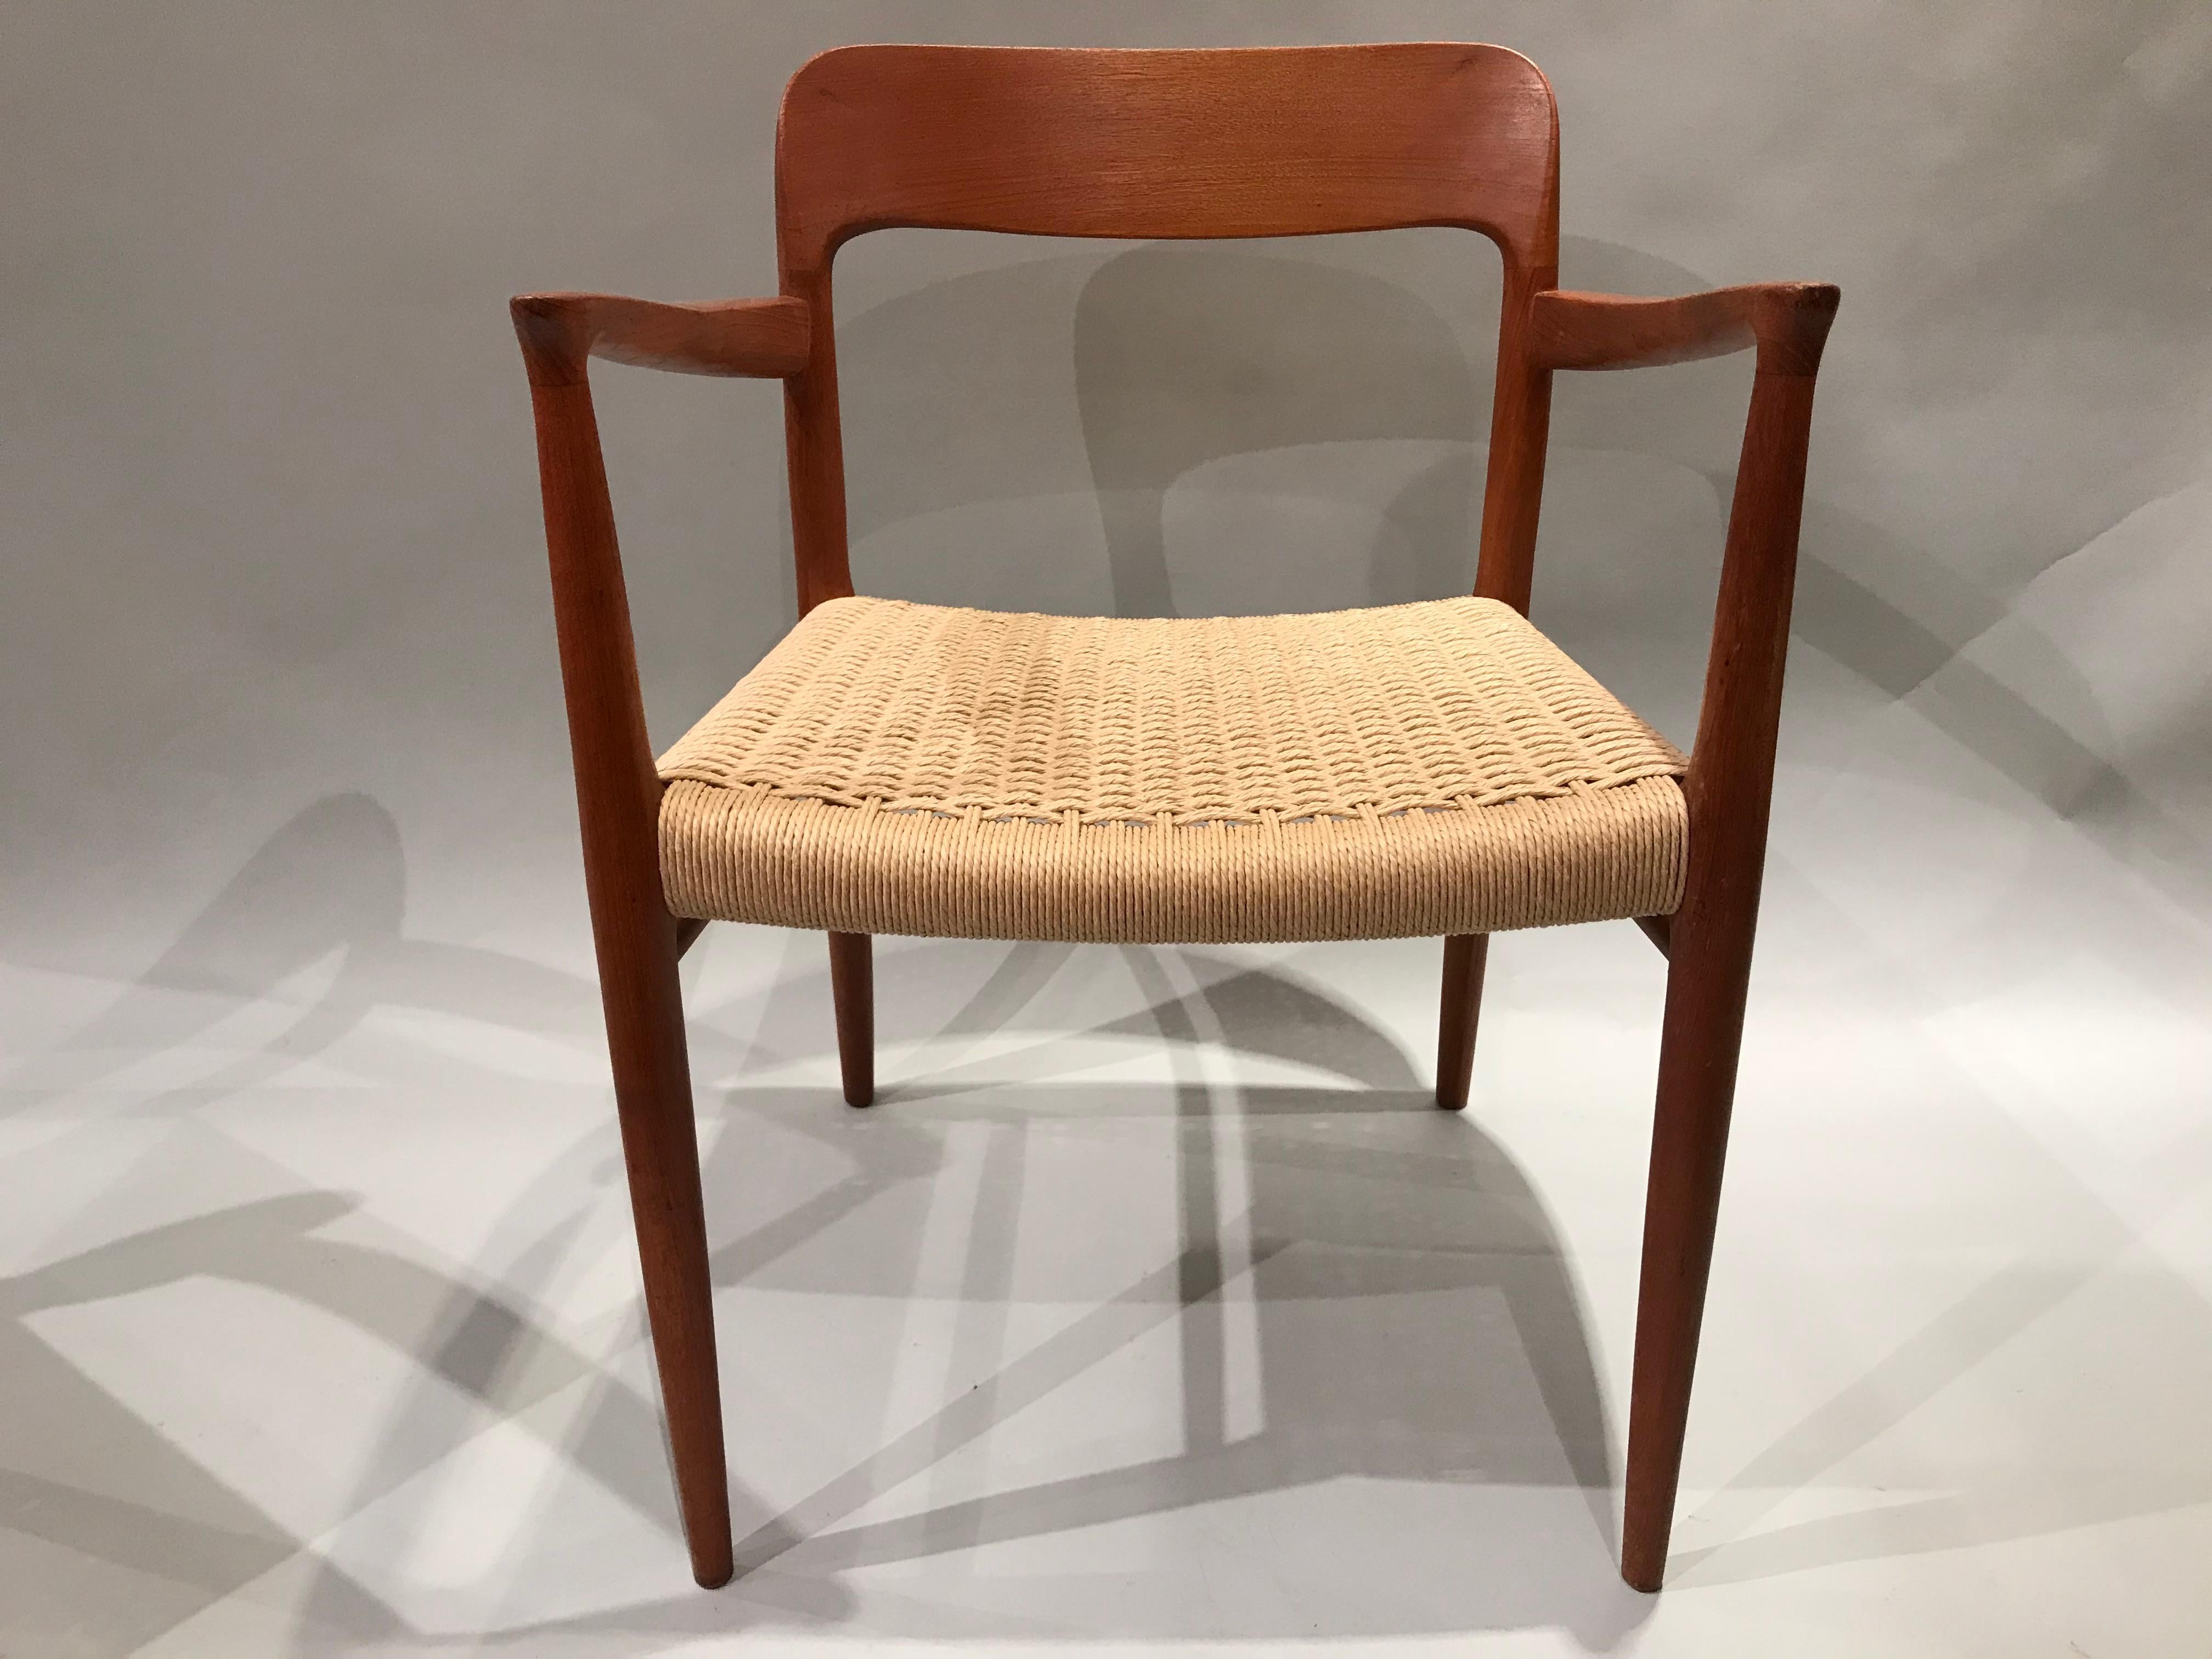 A fine pair of postwar Danish modern teak armchairs with new paper cord seats, designed by Niels Otto Møller for J.L. Møller Møbelfabrik, which was founded by famous Danish furniture designer Niels Otto Møller in 1944. Møller chairs became a coveted